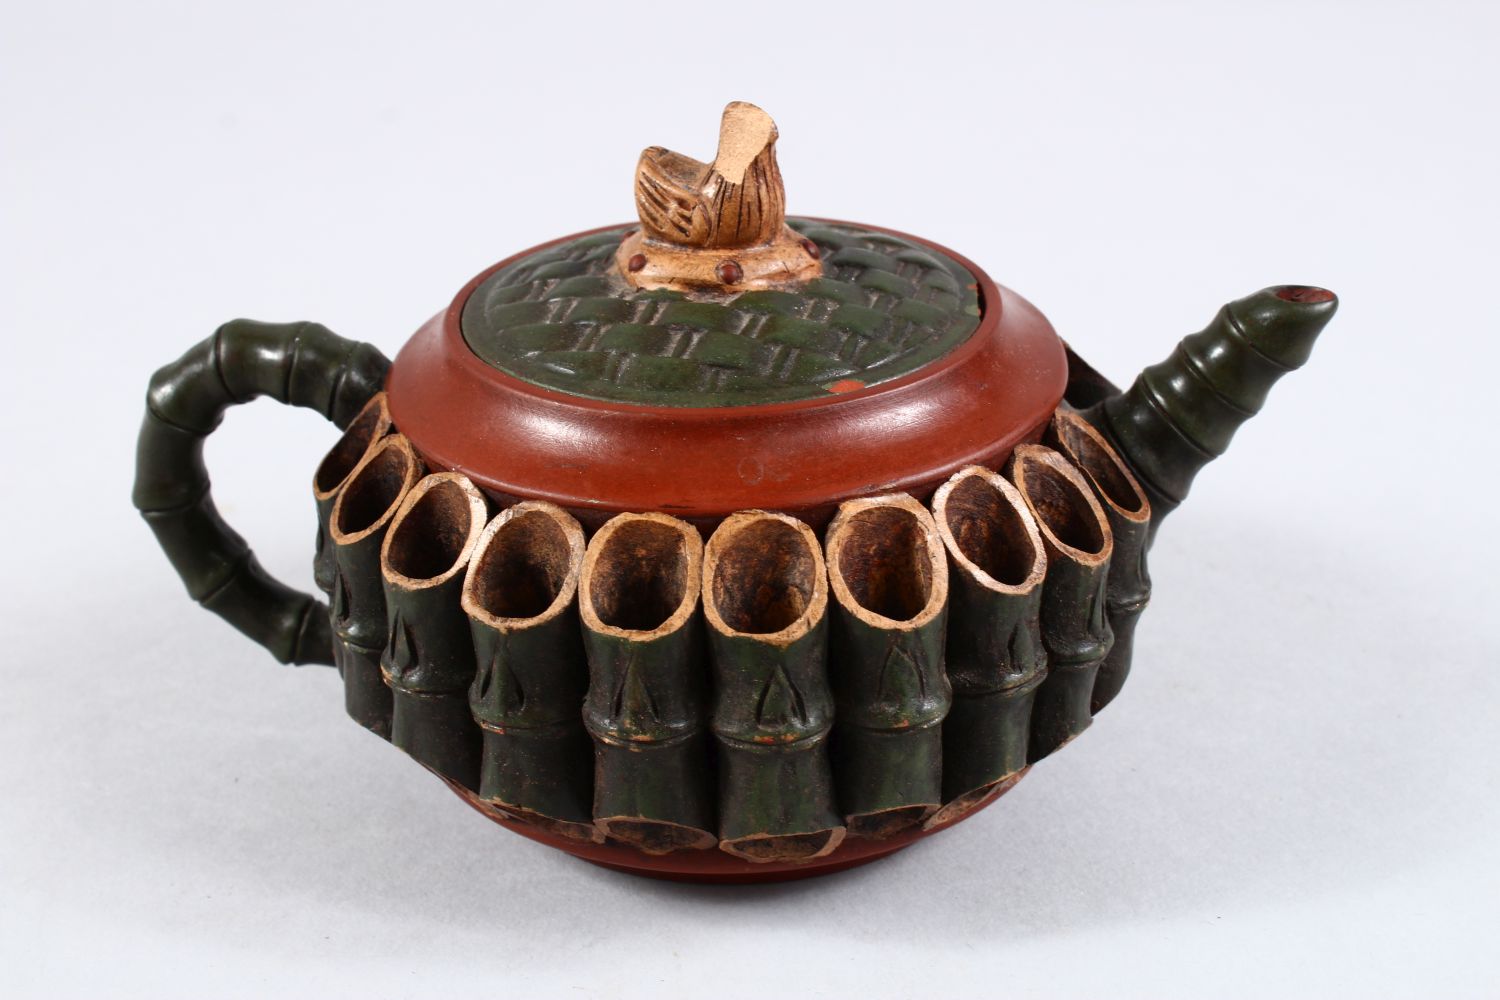 A GOOD 19TH / 20TH CENTURY CHINESE YIXING CLAY TEAPOT, the body with moulded bamboo form, with a - Image 2 of 7